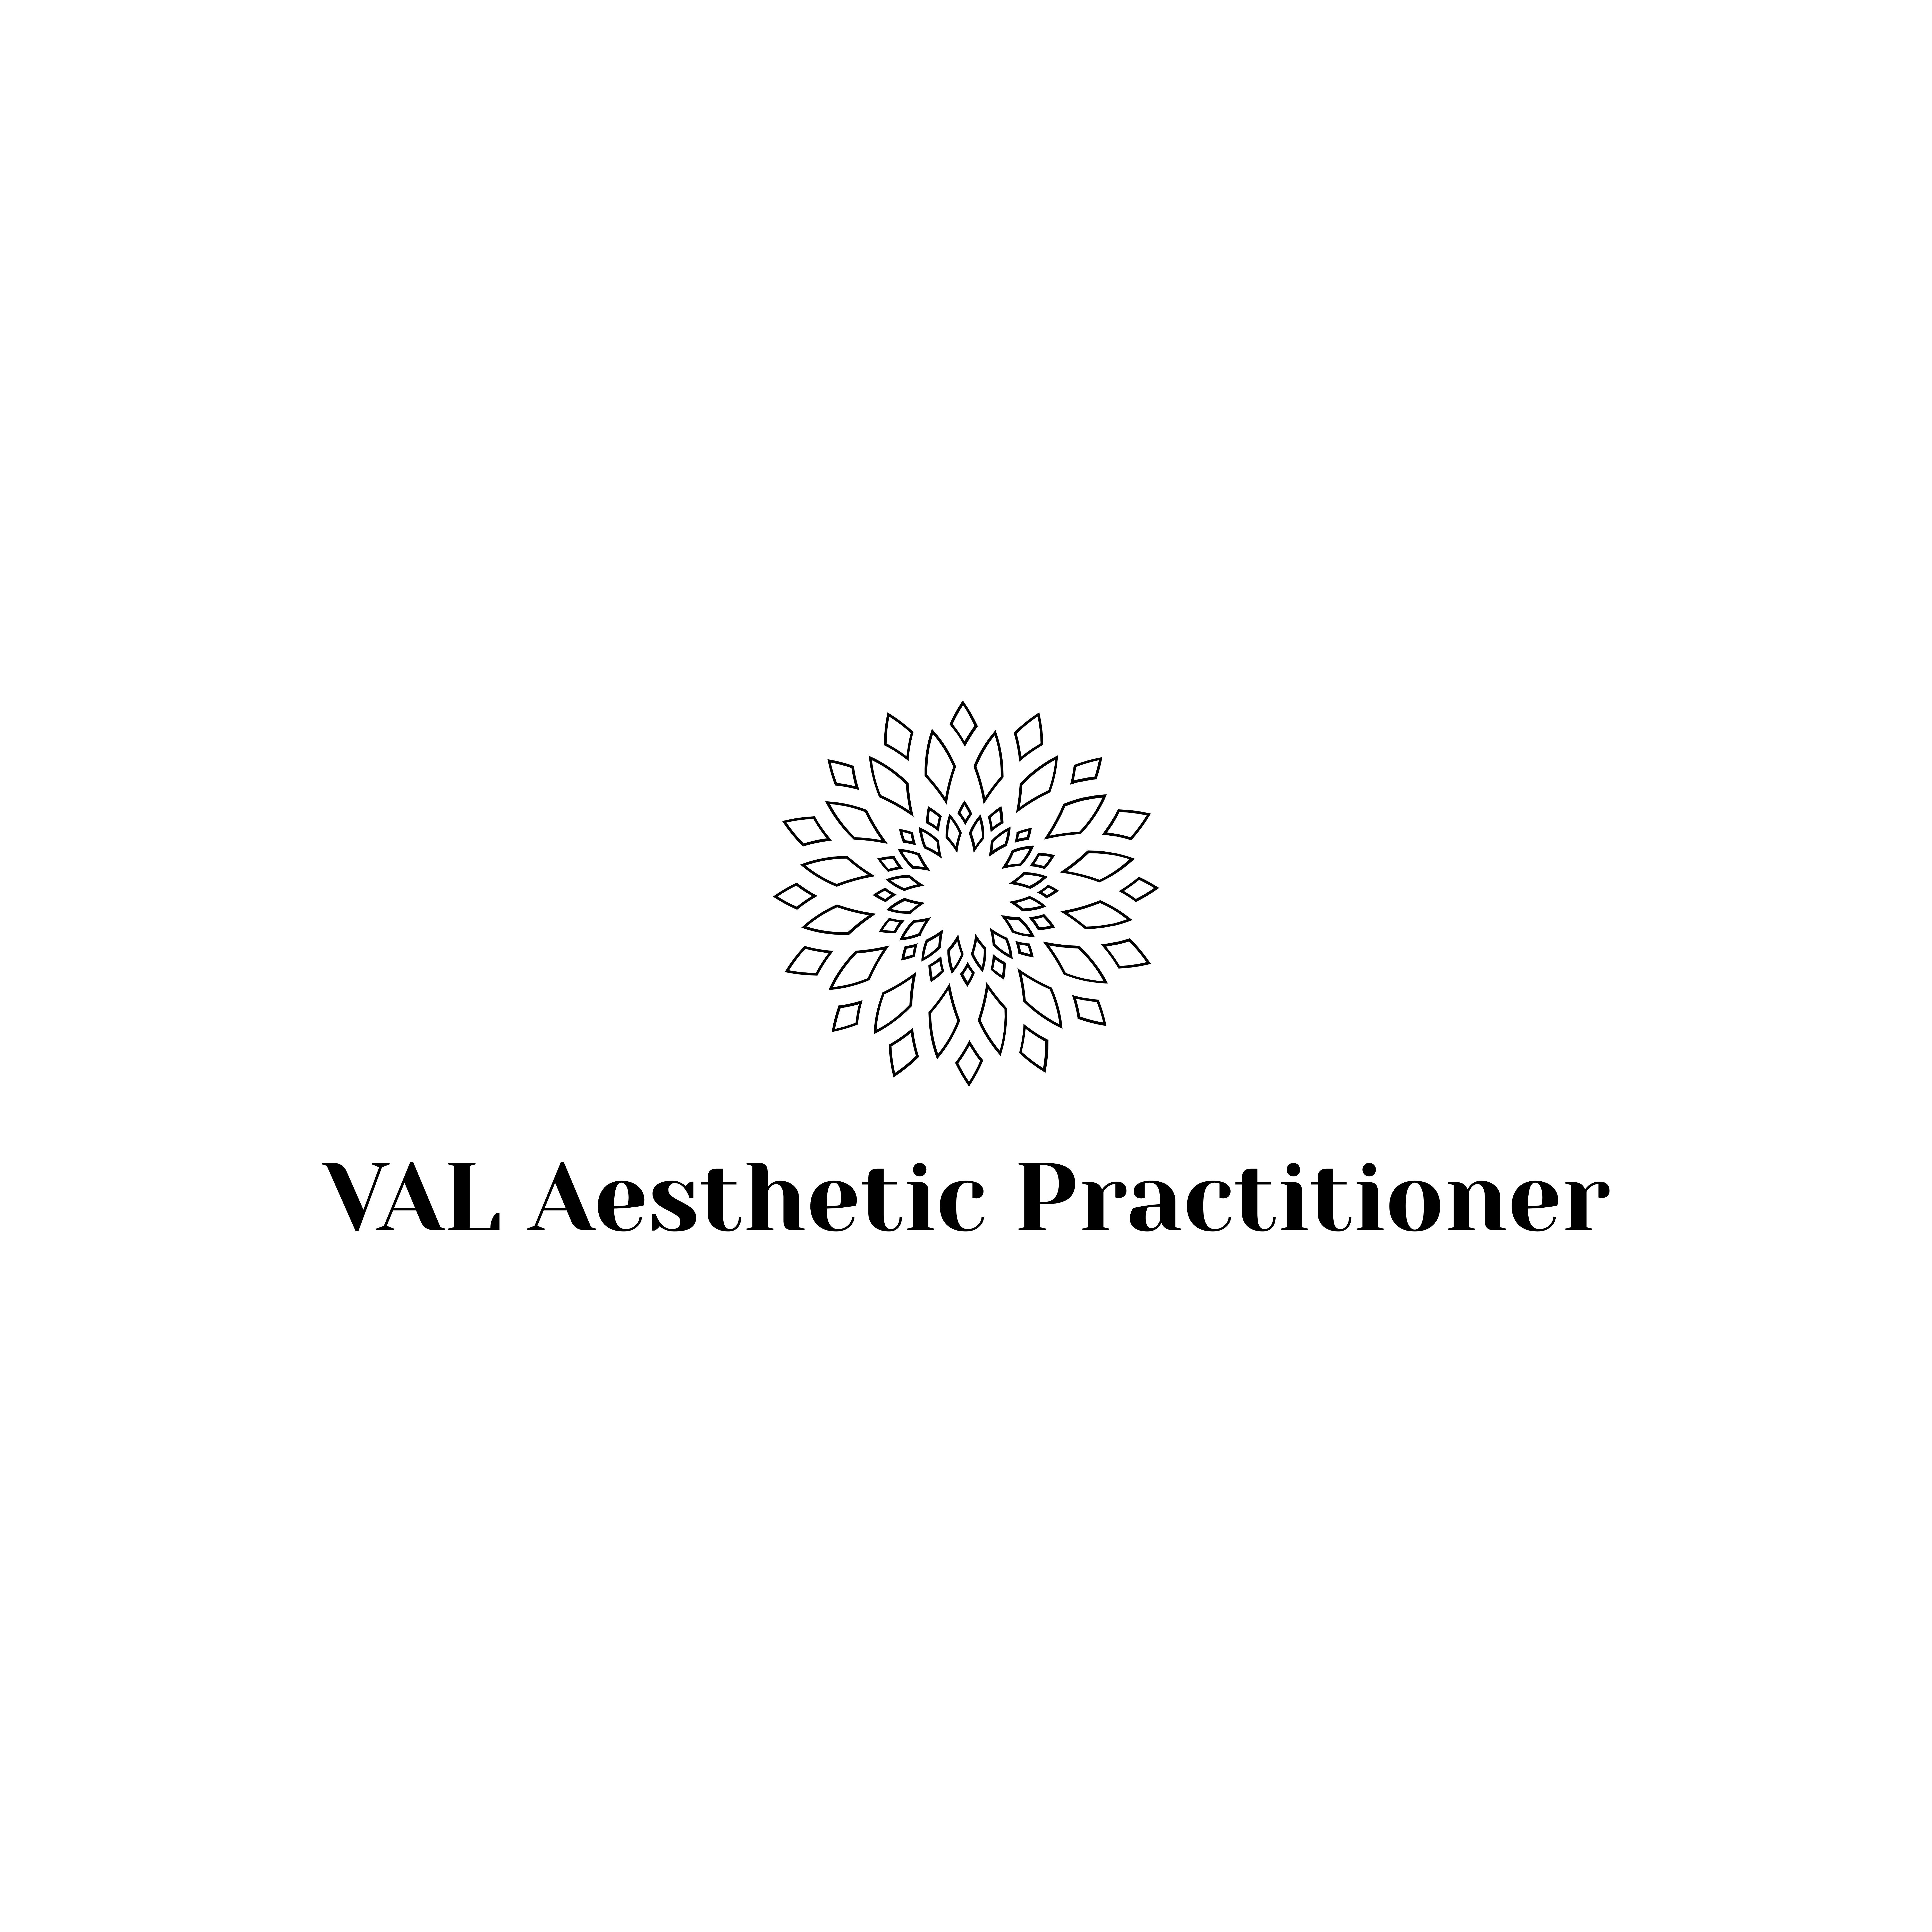 Val Aesthetic Practitioner